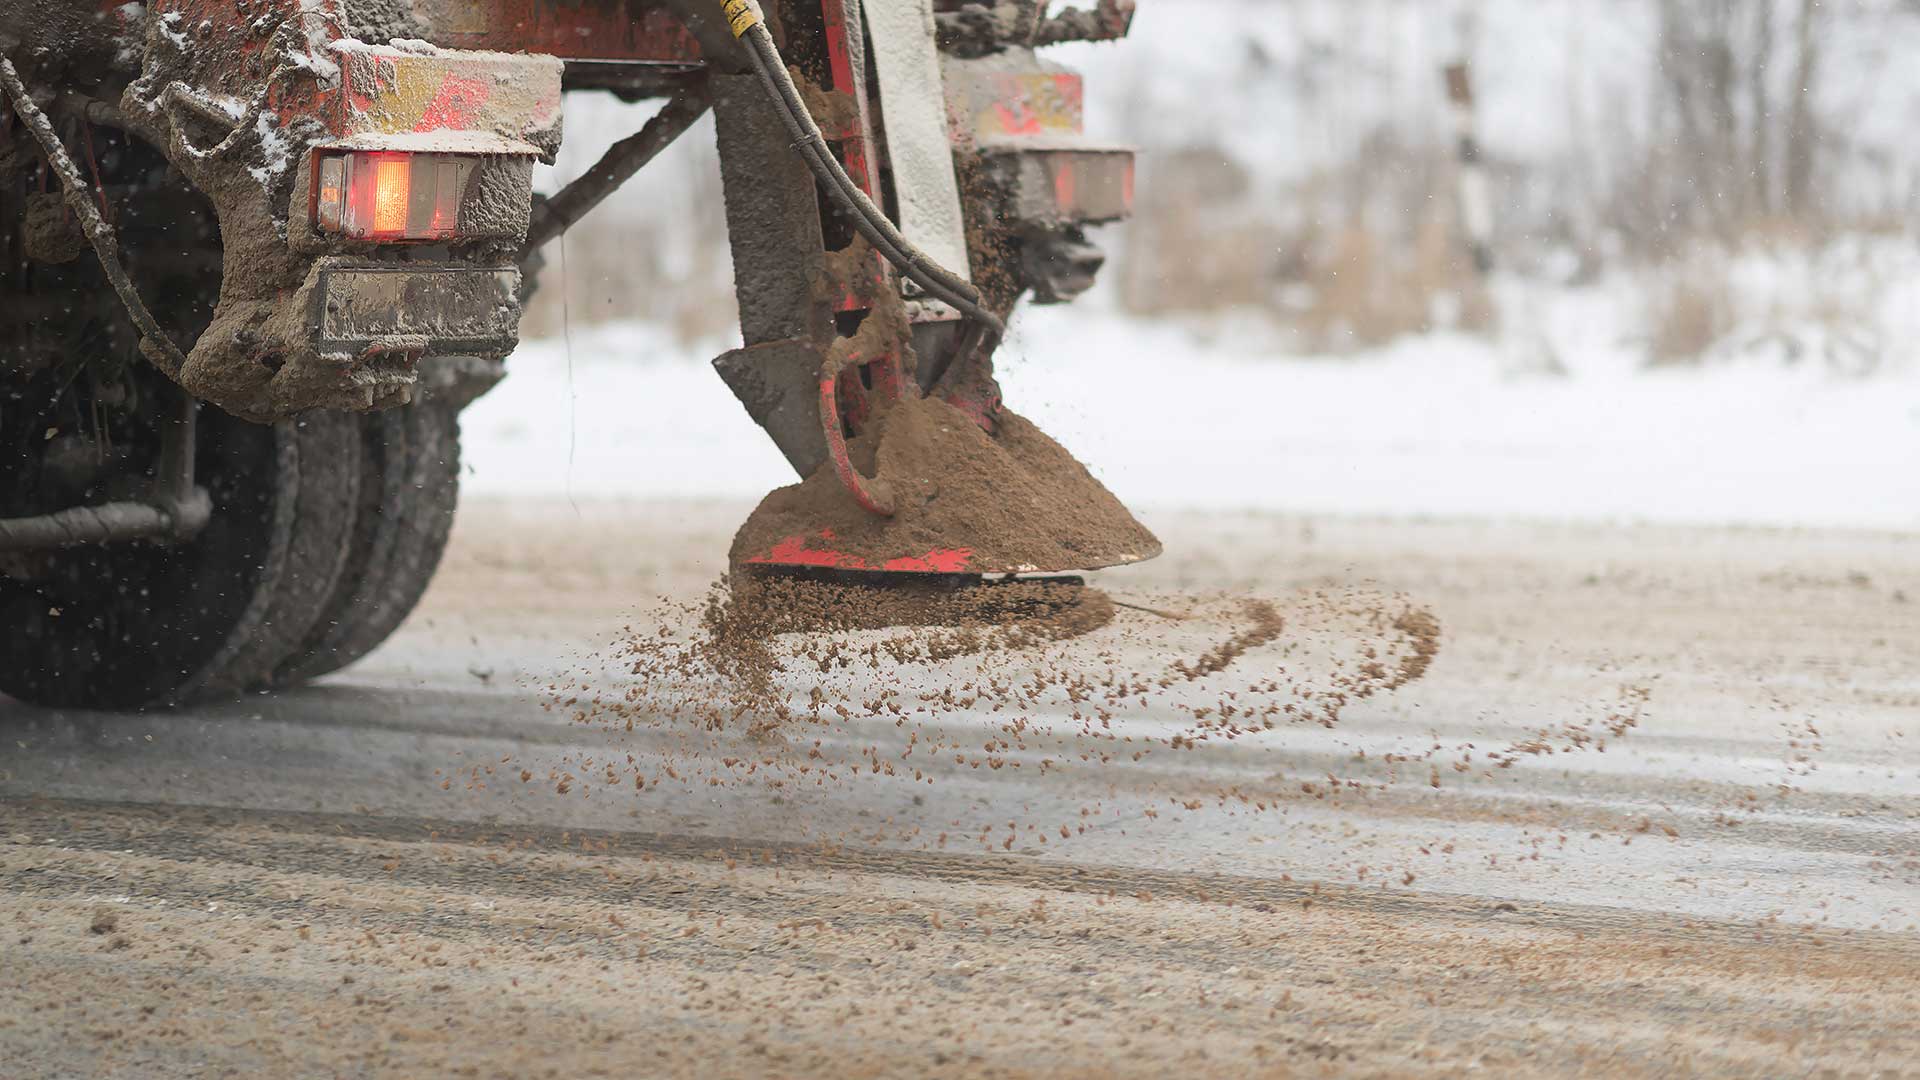 Close-up of a road gritter spreading salt